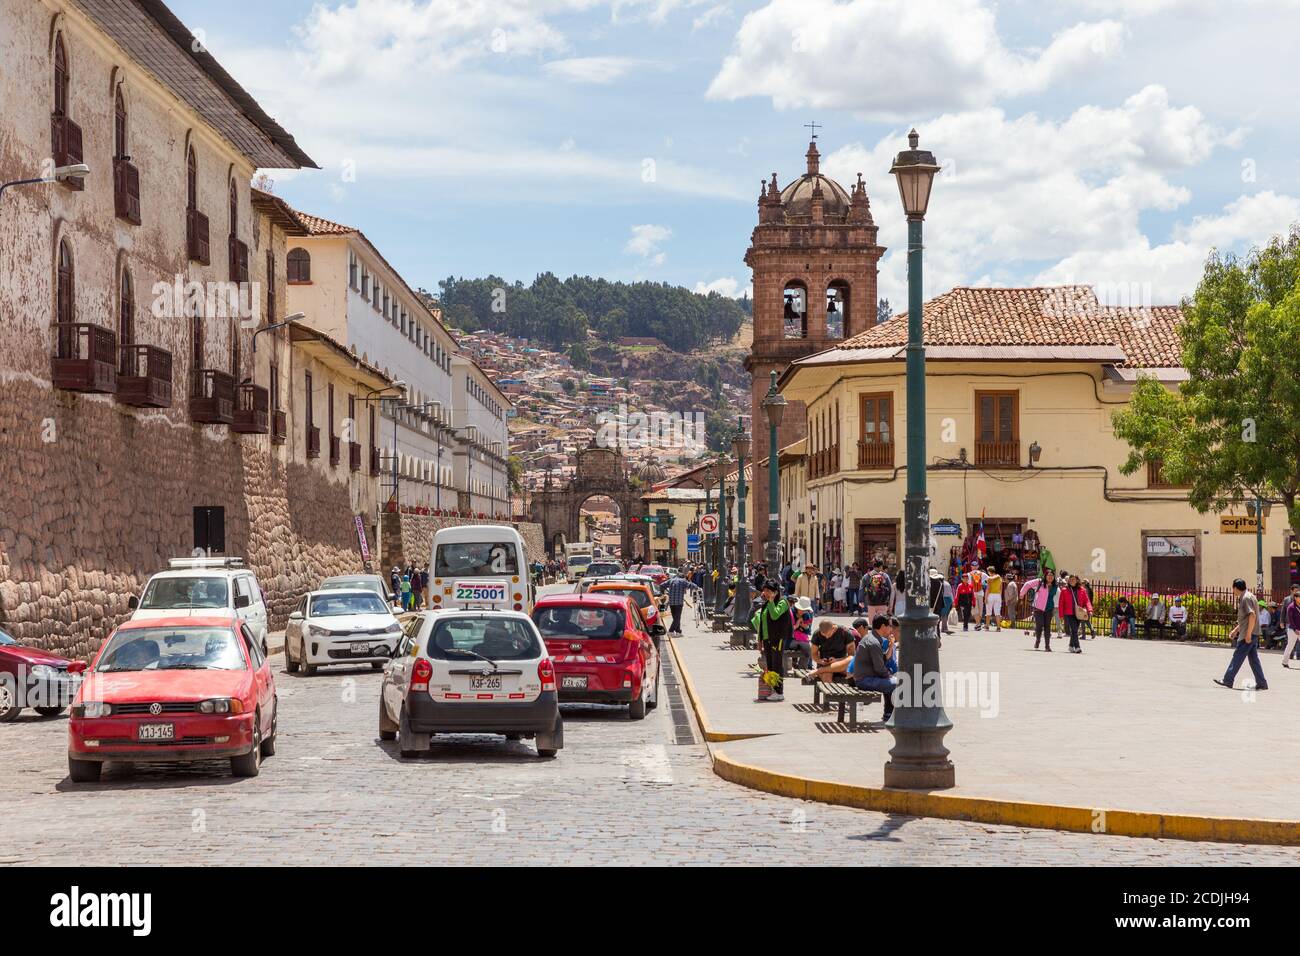 Cusco, Peru - october 08, 2018: View of people walking in the streets of the historic center of the city of Cusco, near the Church of San Pedro, Cusco Stock Photo